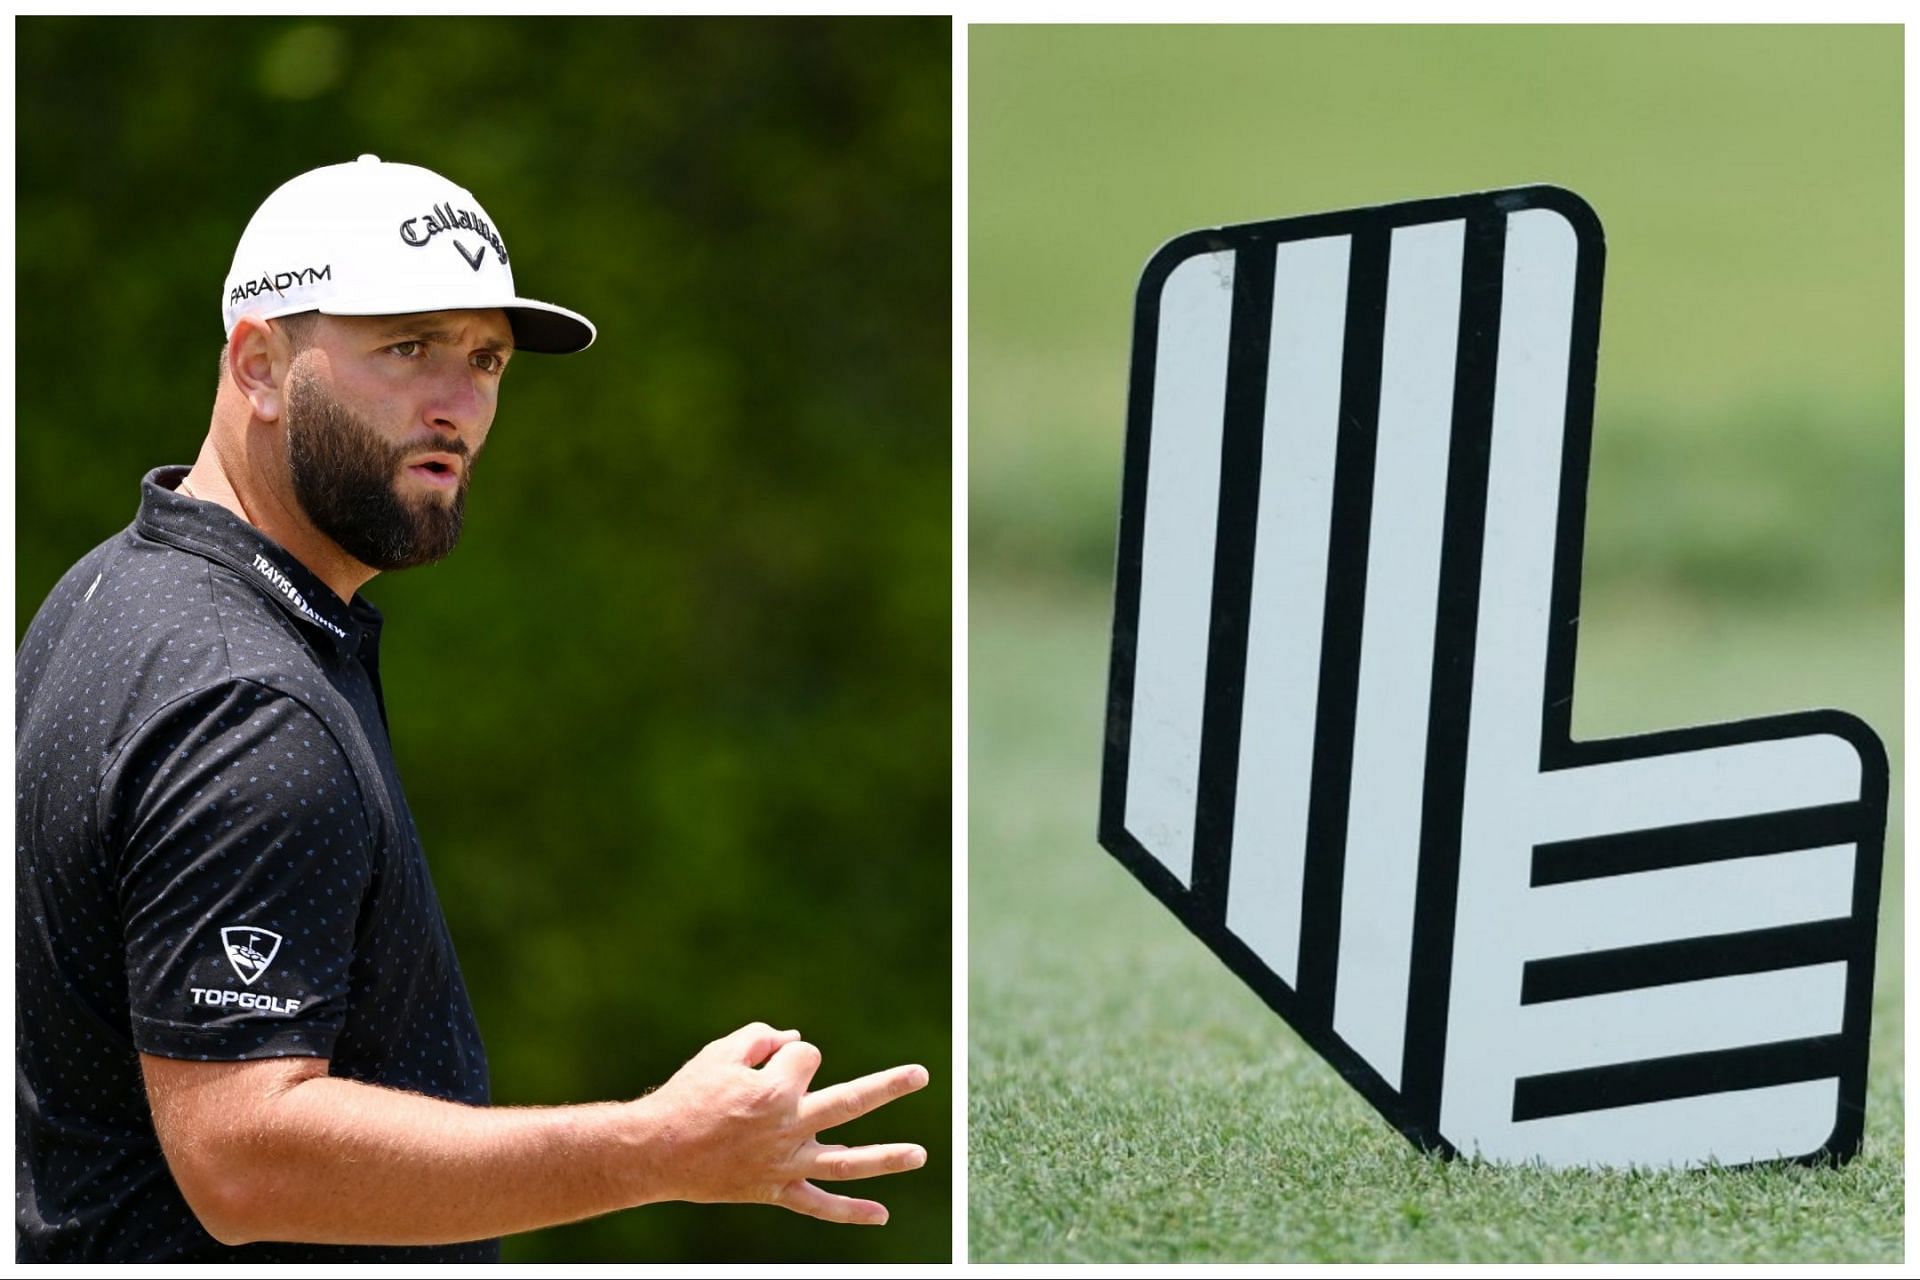 Jon Rahm is reportedly in advanced talk with LIV Golf to make a switch